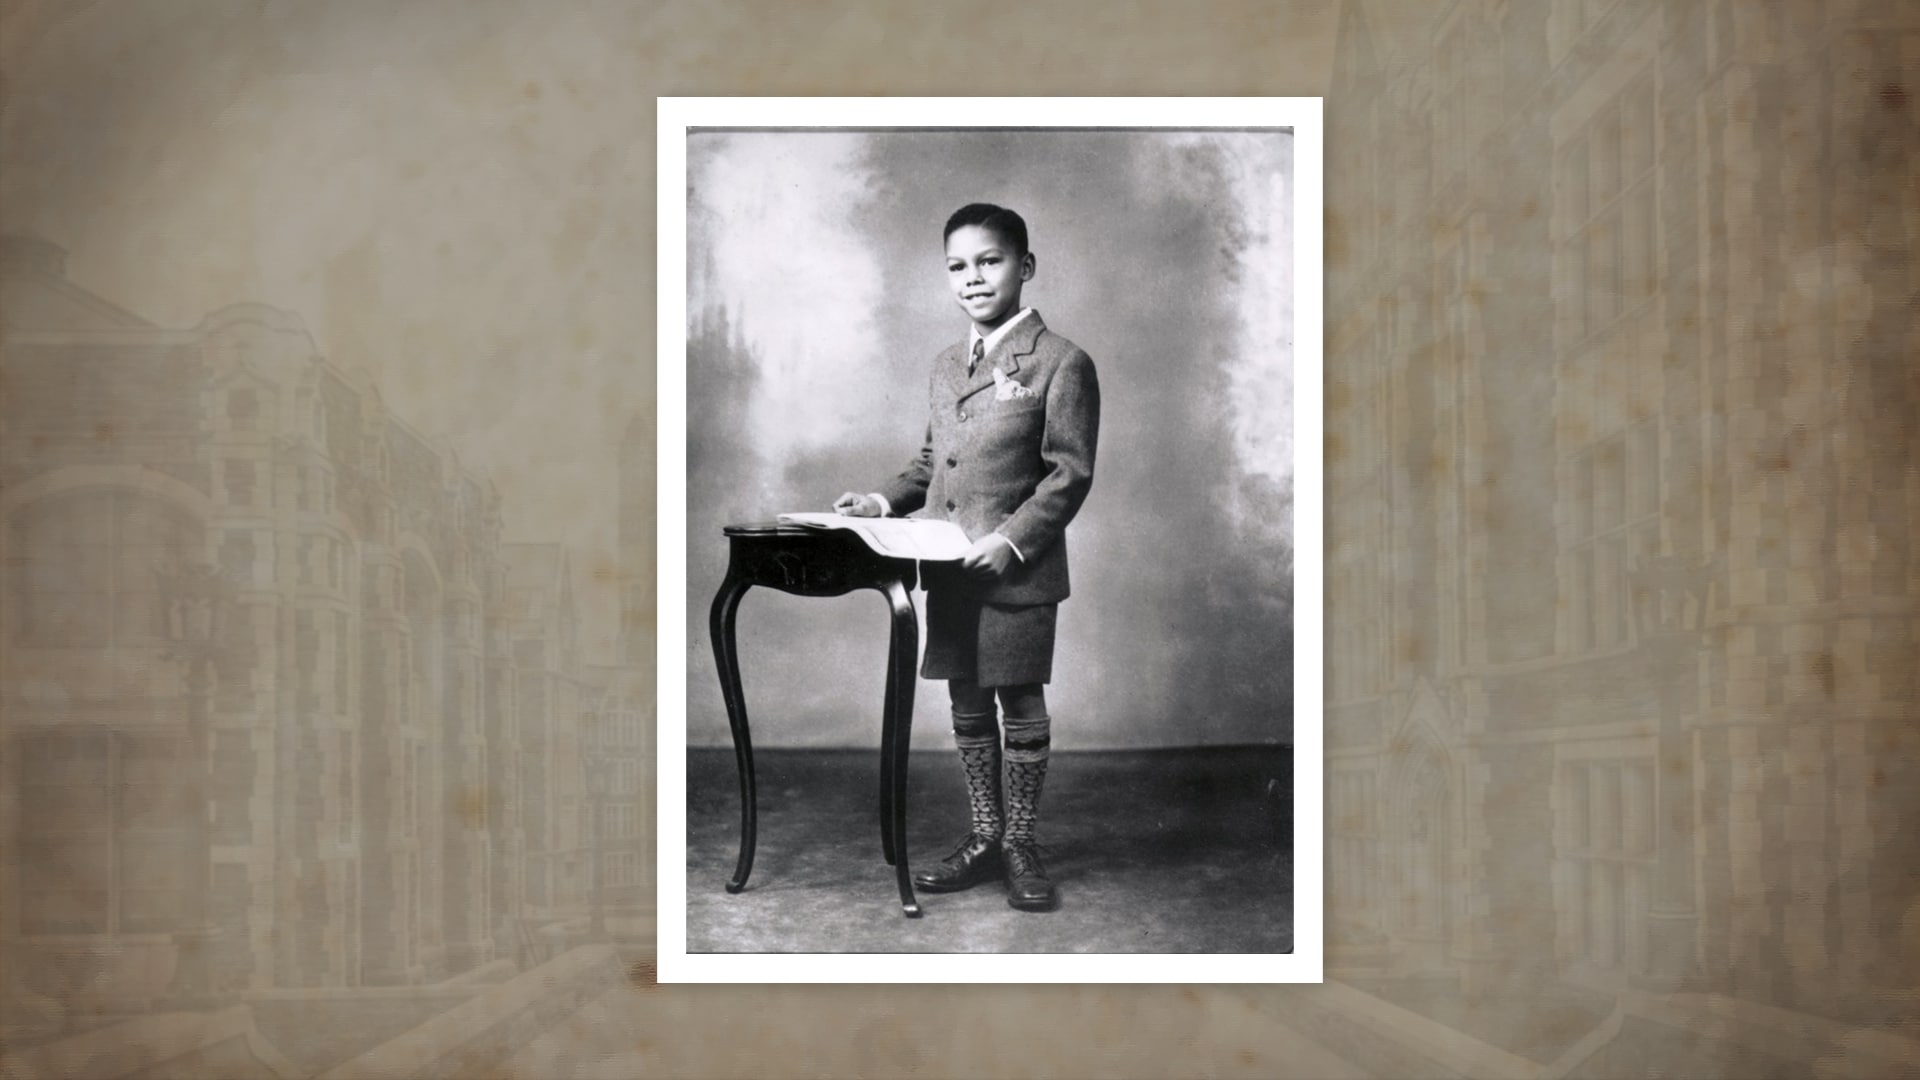 A picture of a young Colin Powell - like 8-10 years old.